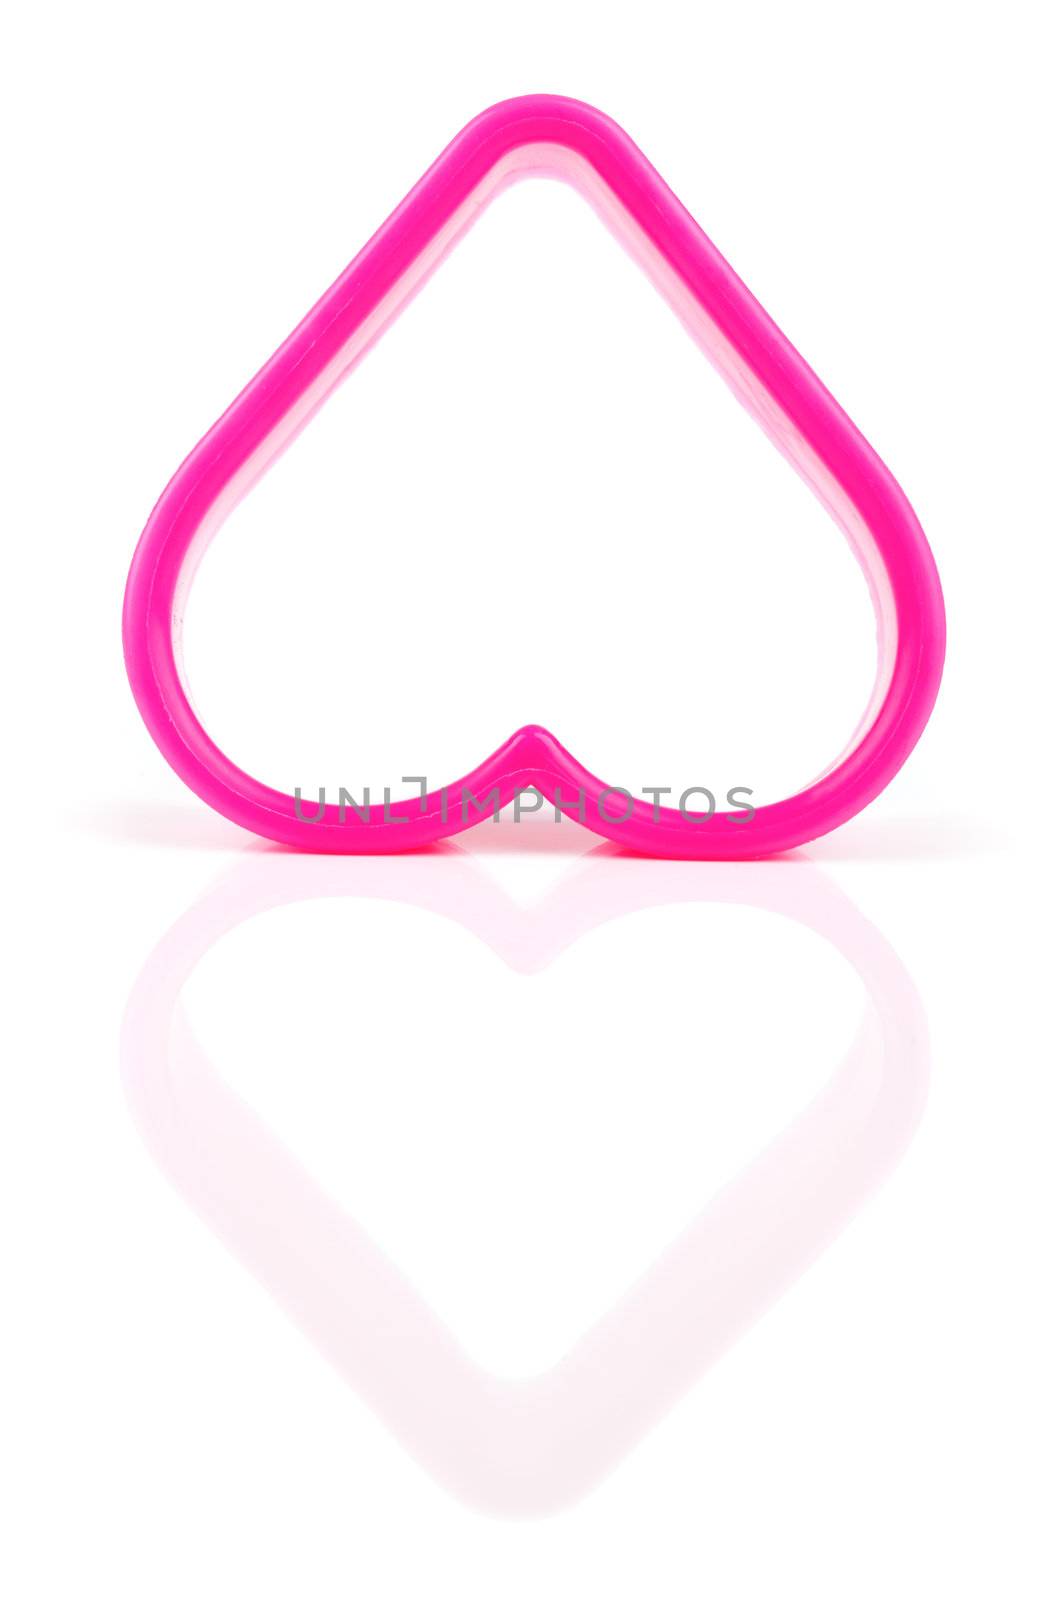  heart shaped cookie cutter on a white background by motorolka